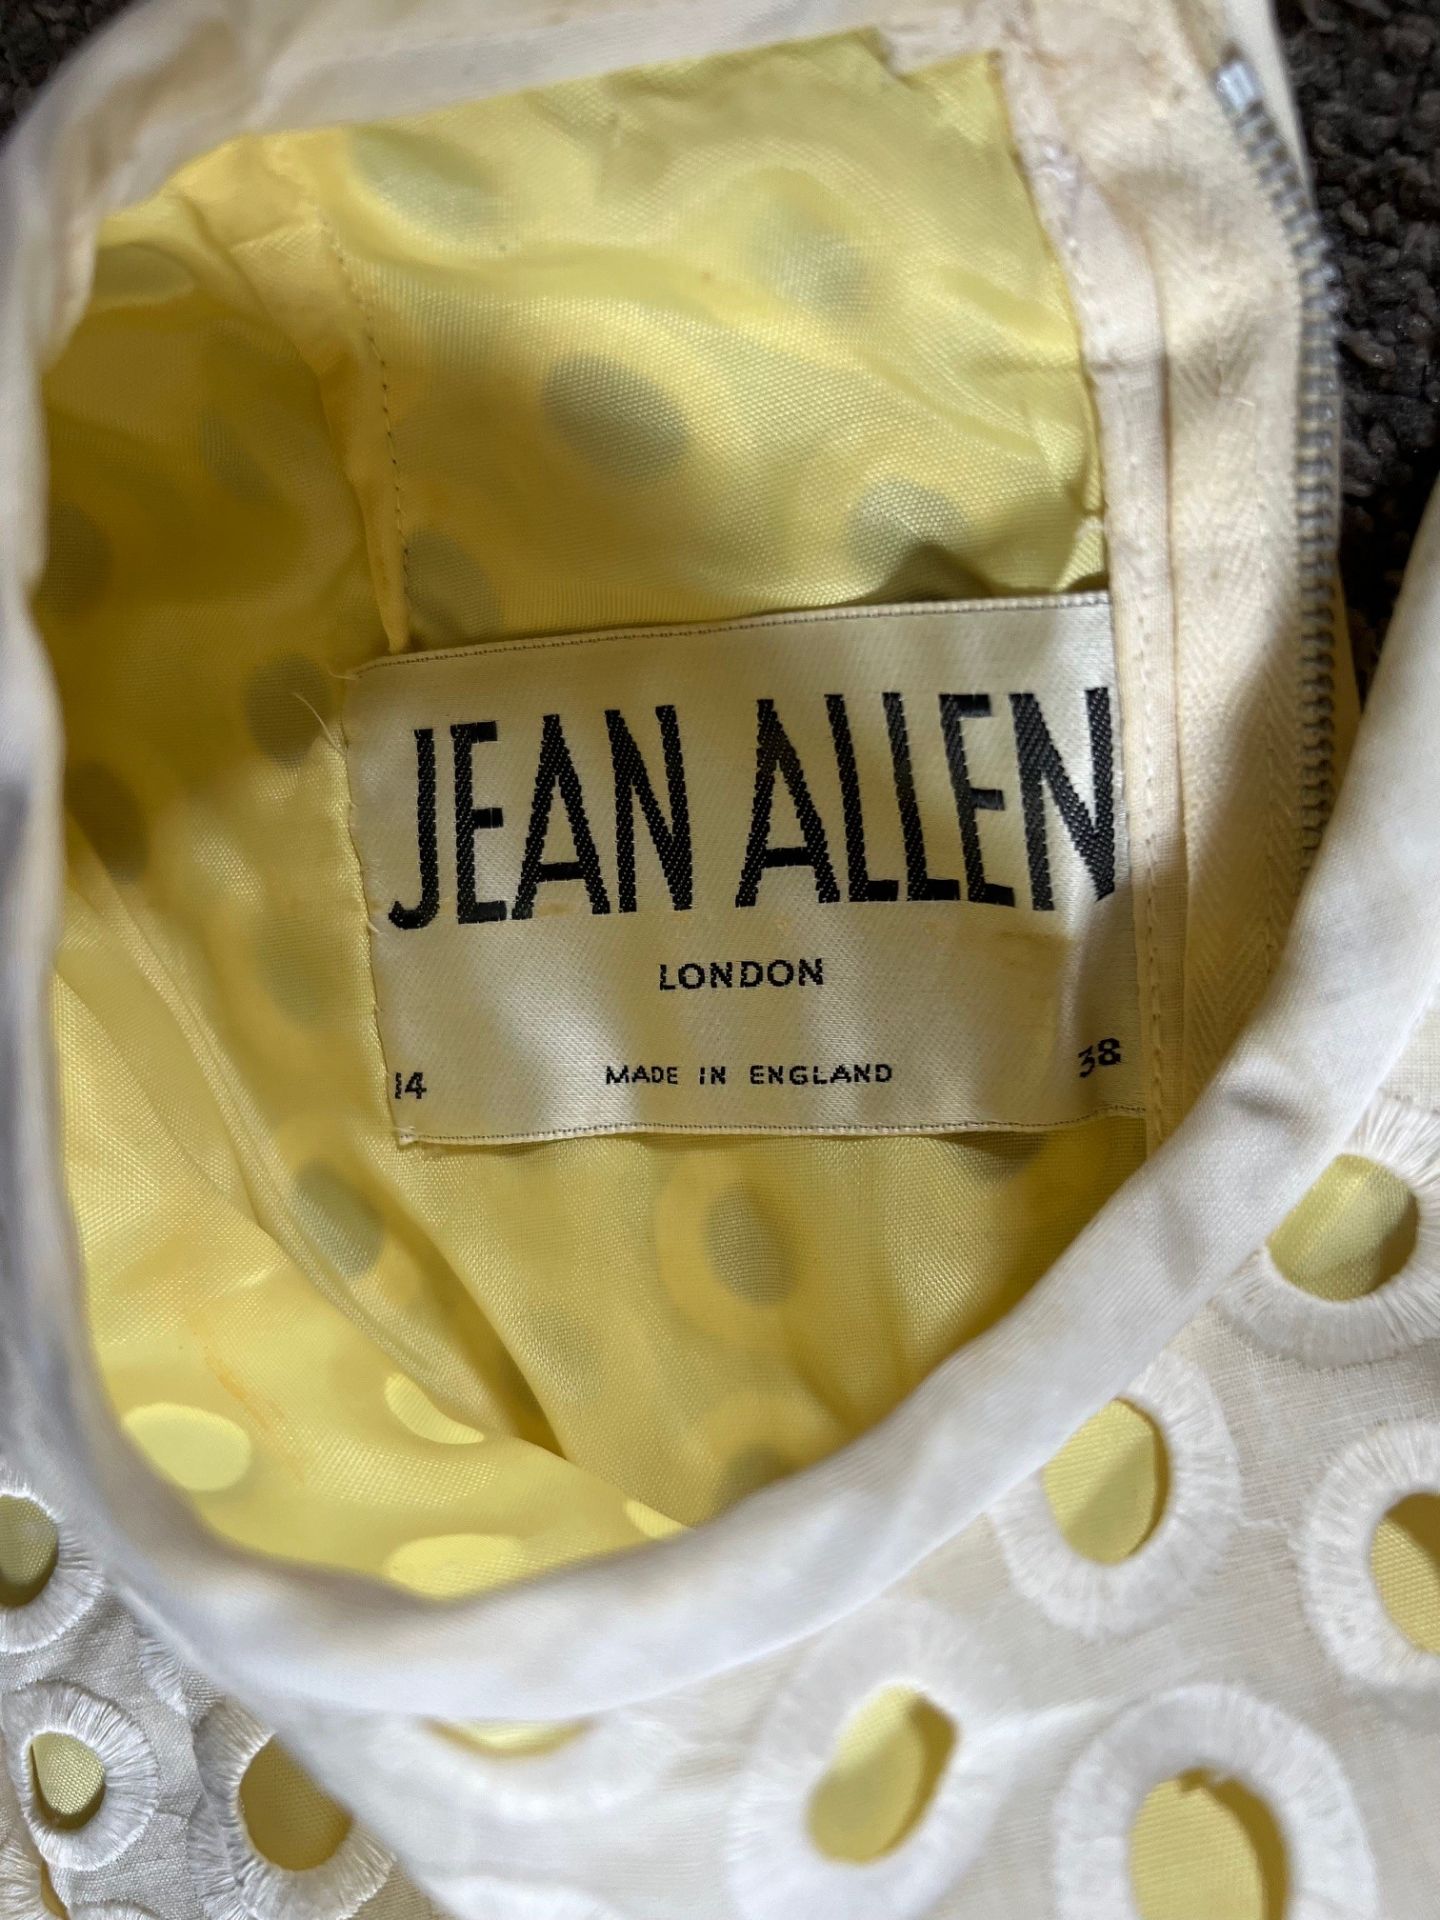 'JEAN ALLEN' 60s STYLE DRESS, WHITE BRODERIE ANGLAISE WITH YELLOW LINING, SIZE 14 - Image 2 of 2